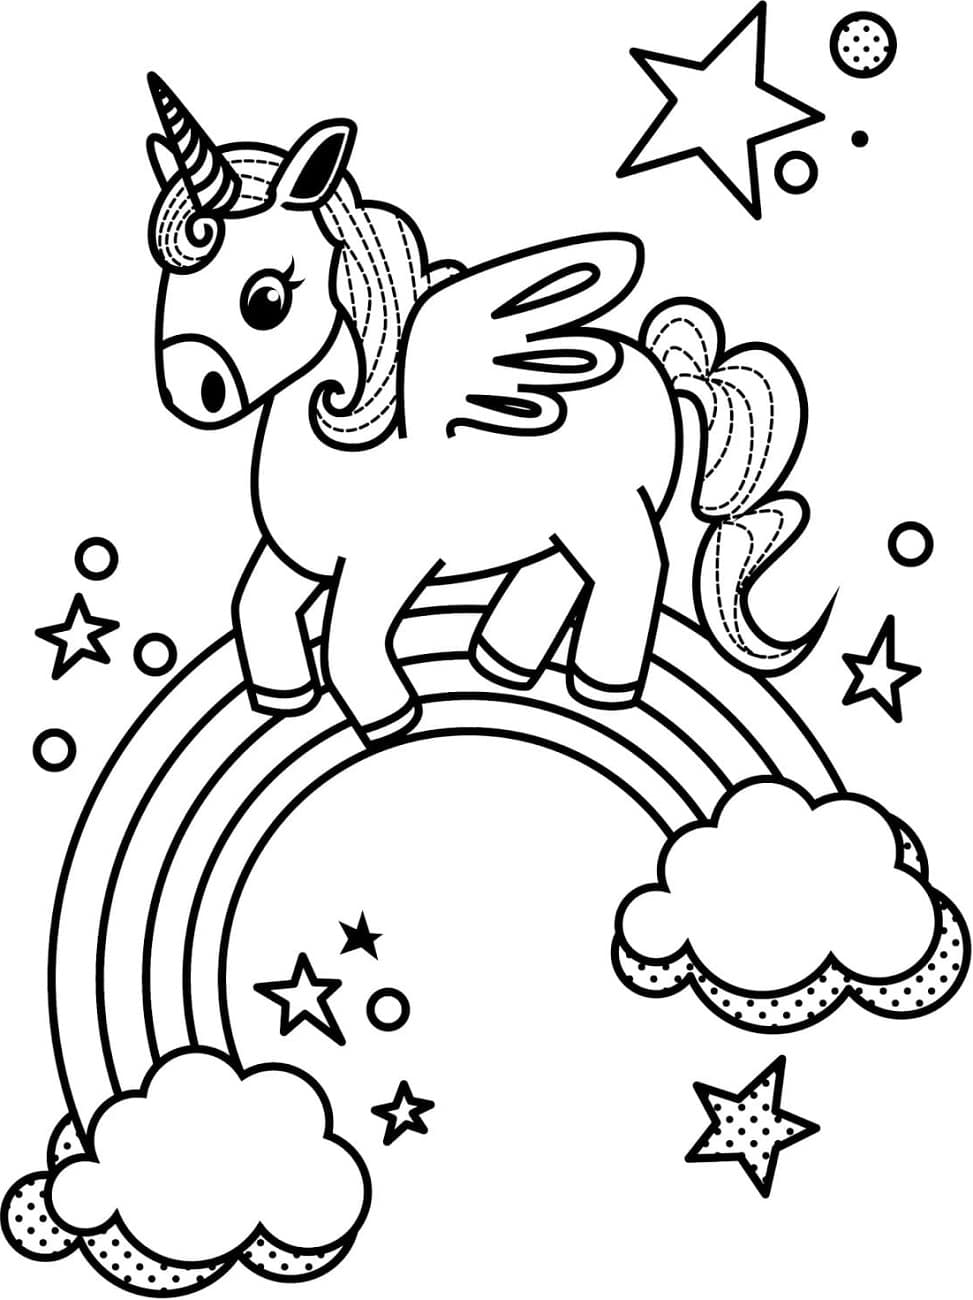 Mandala Unicorn Coloring Page Free Printable Coloring Pages for Kids